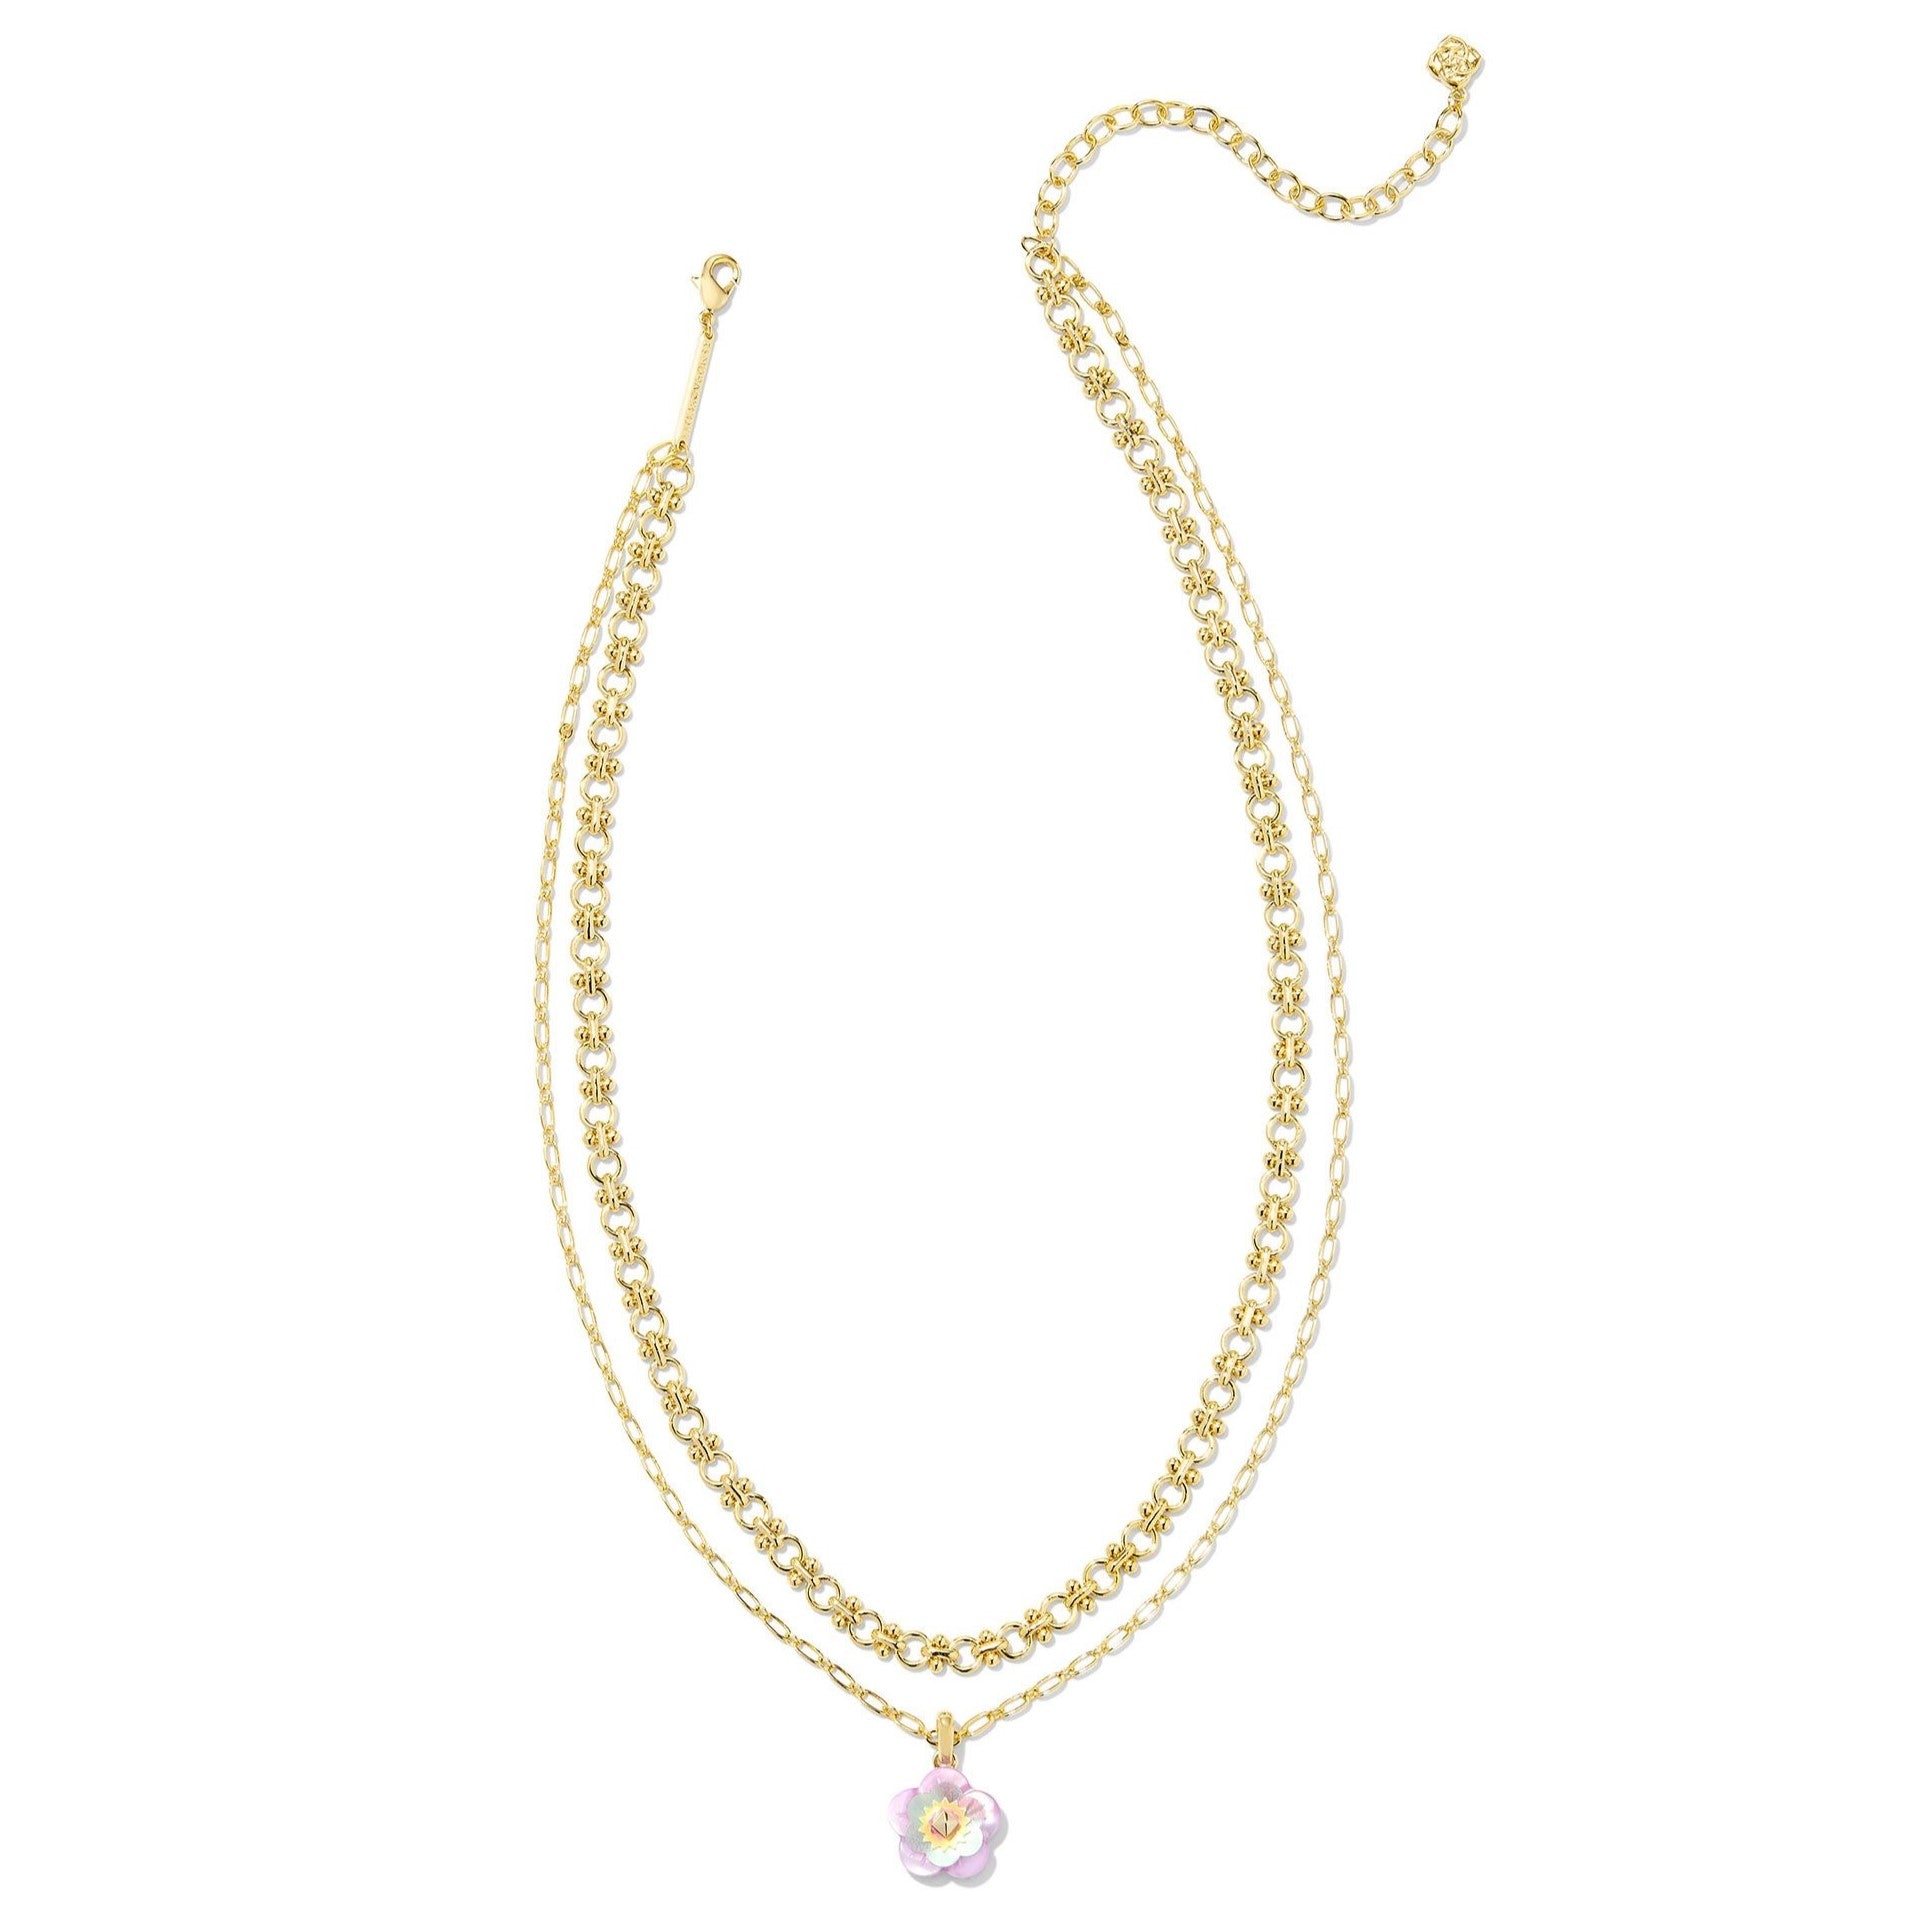 Kendra Scott | Deliah Gold Multi Strand Necklace in Pastel Mix - Giddy Up Glamour Boutique